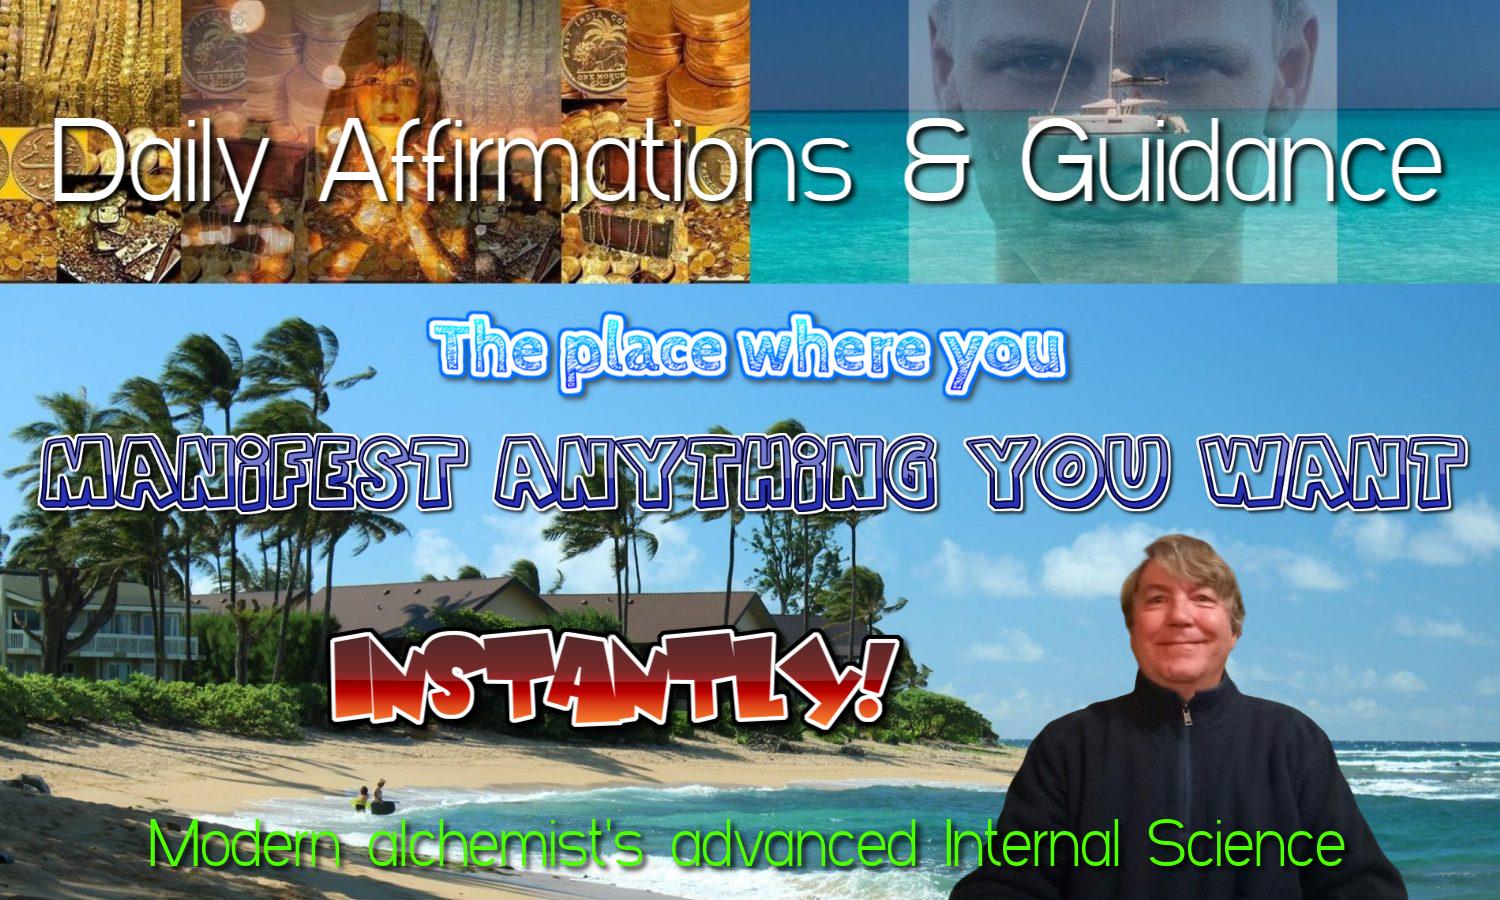 Free online daily affirmations guidance given daily Eastwood